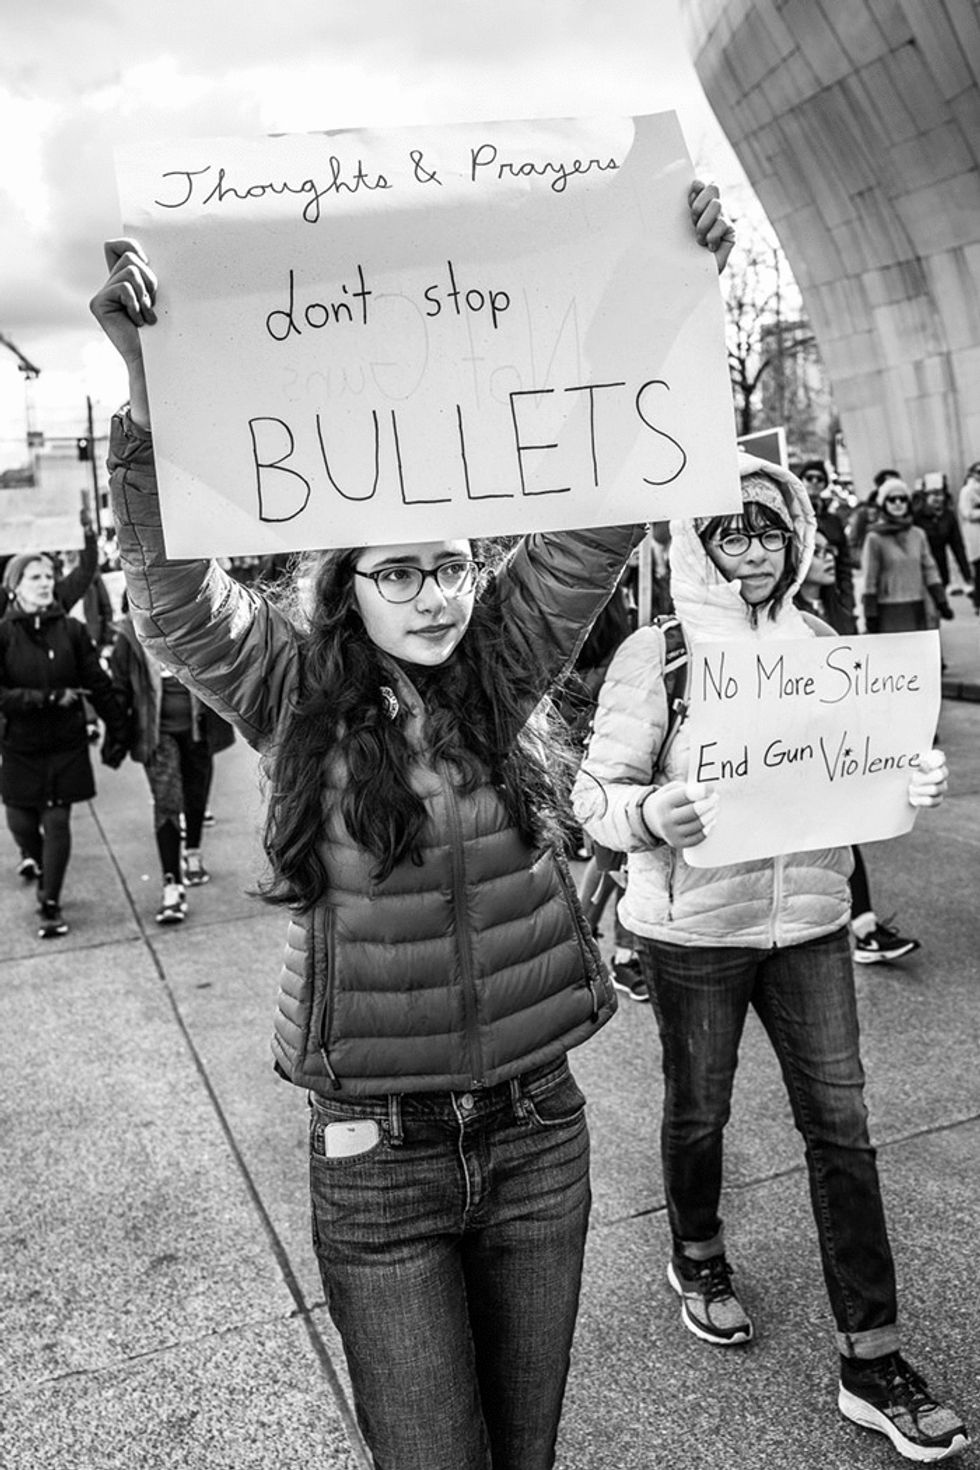 A Letter to Our Representatives On Gun Control